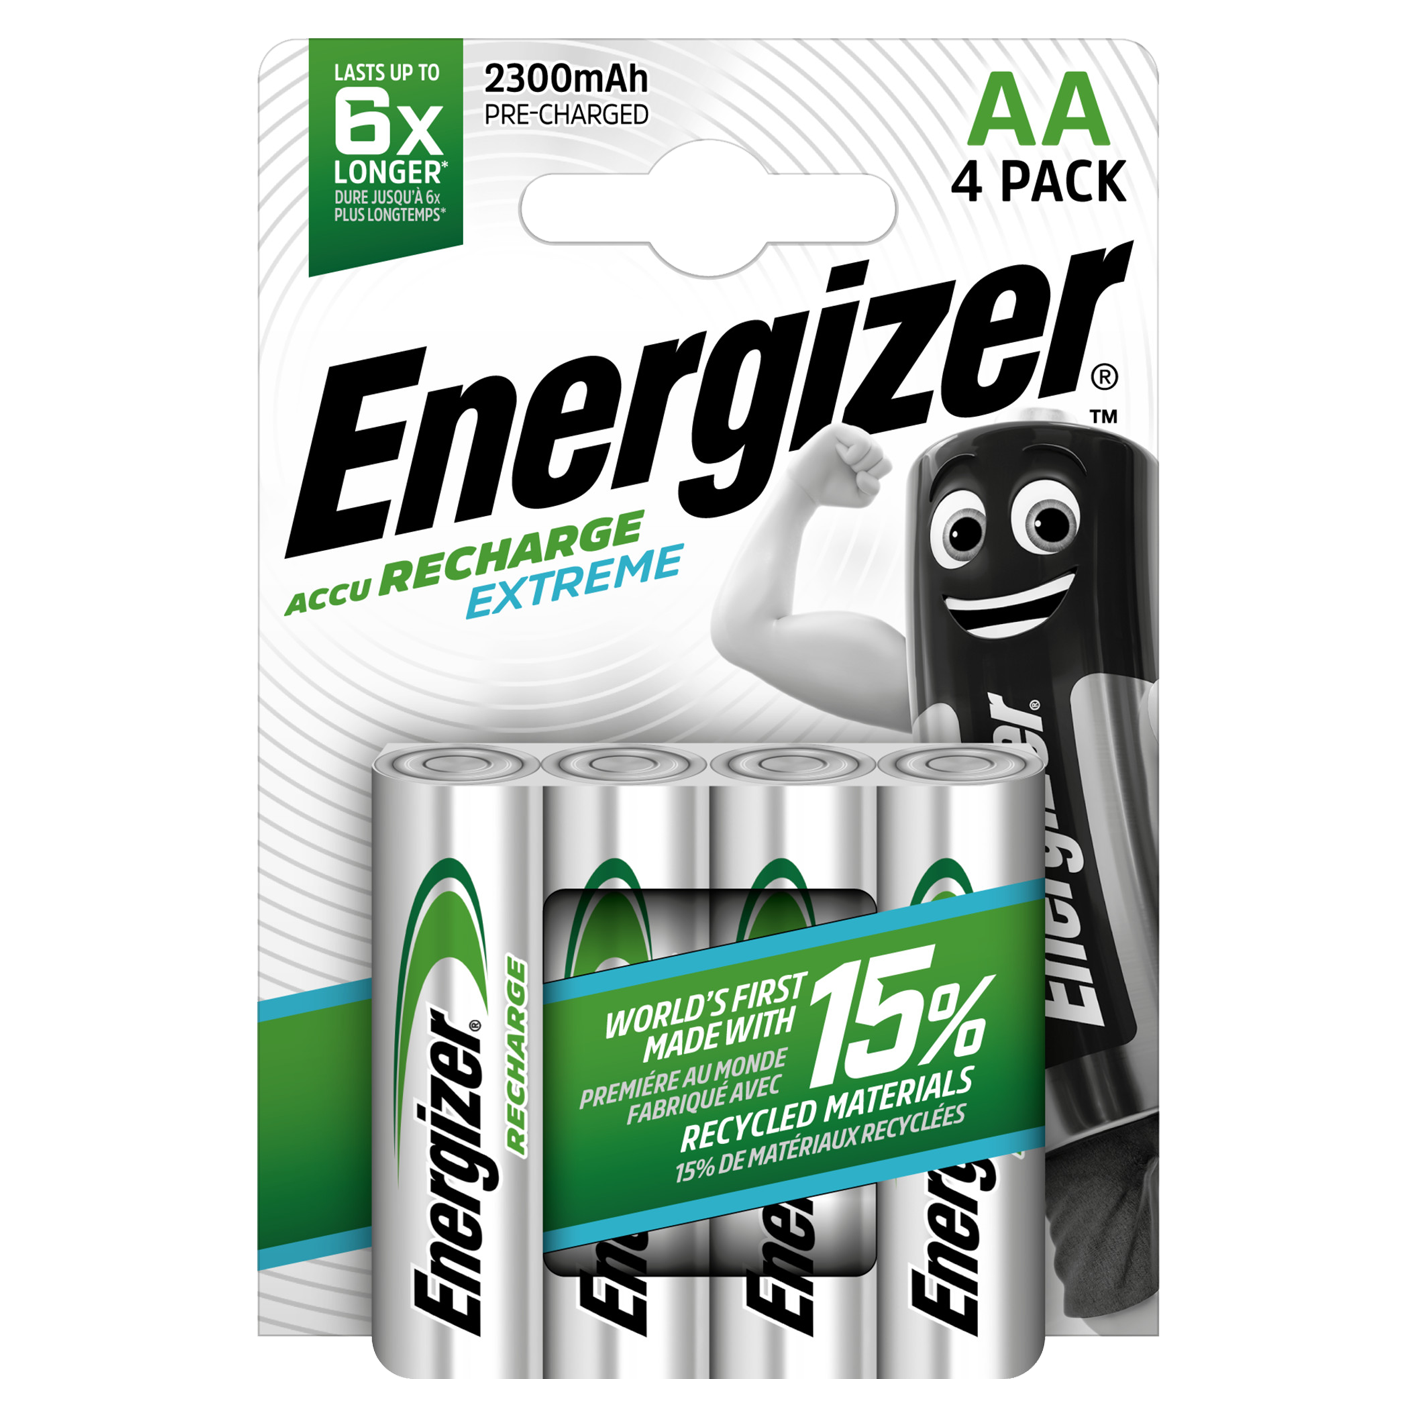 Energizer AA 2300mAh Recharge Extreme, Pack of 4